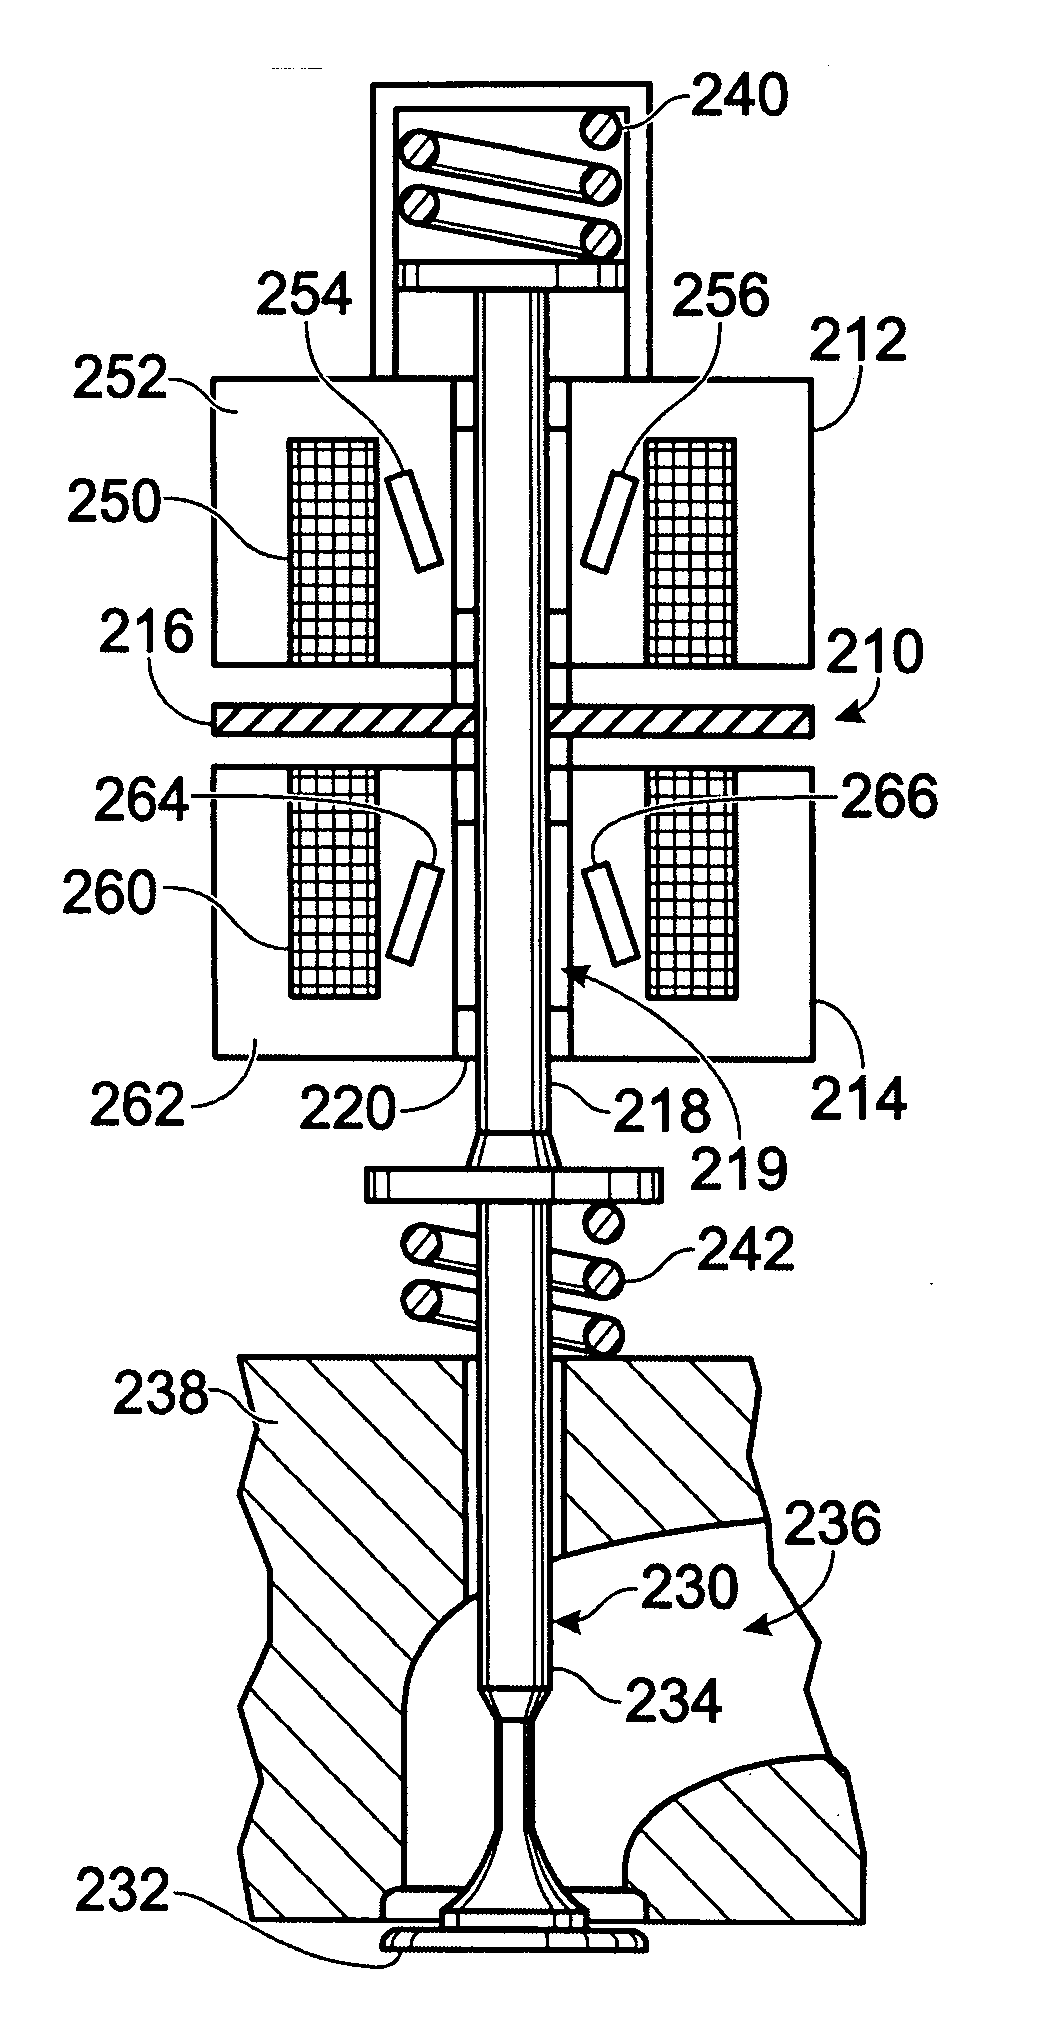 Enhanced permanent magnet electromagnetic actuator for an electronic valve actuation system of an engine